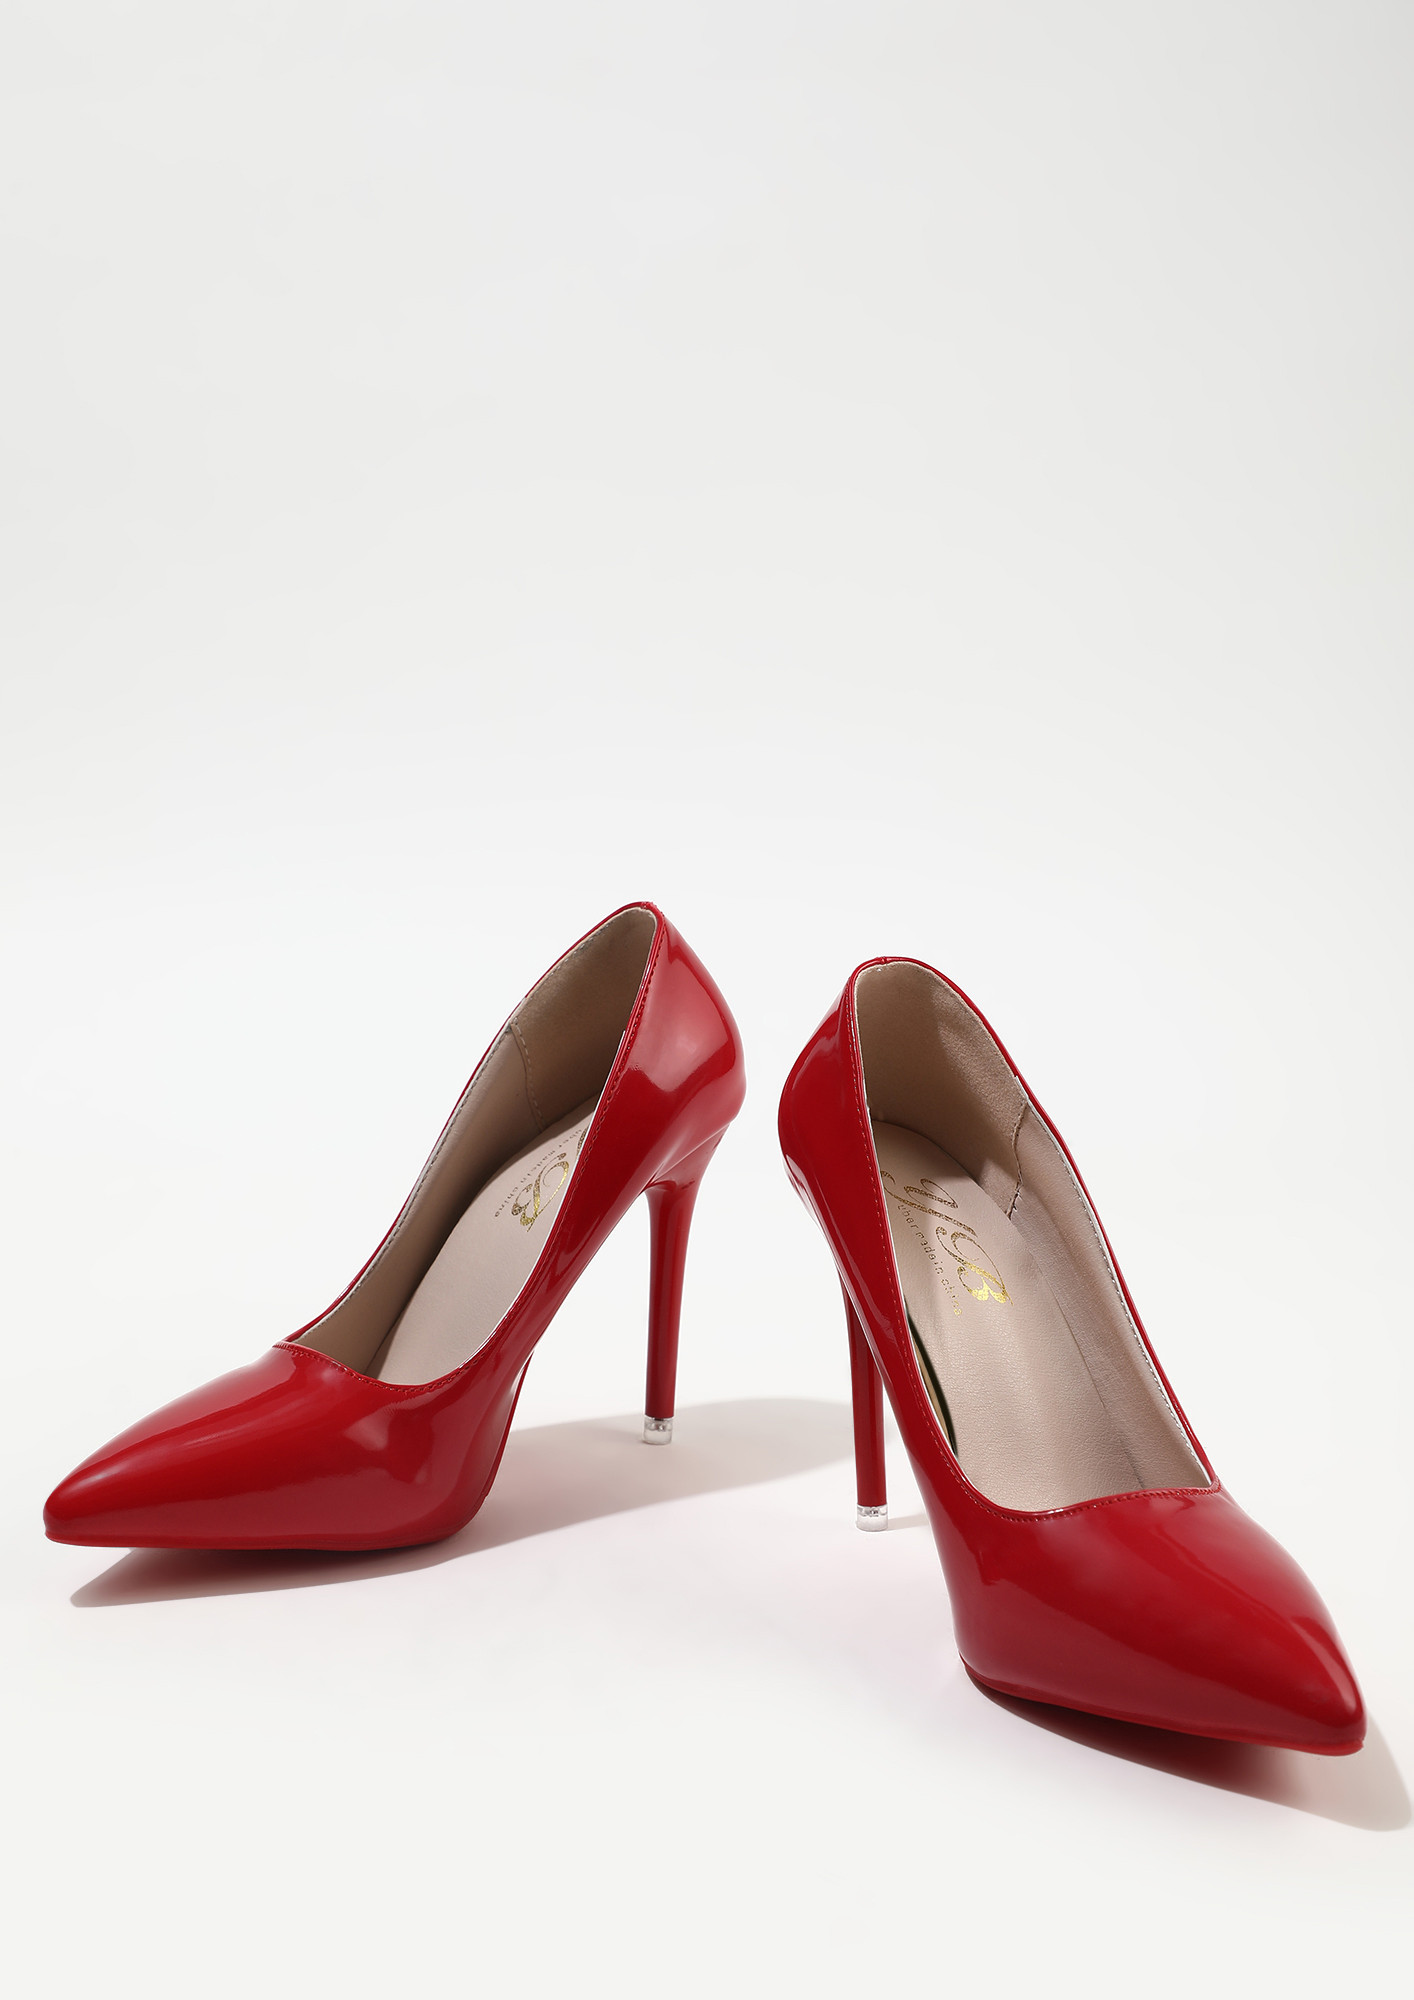 LEATHER HIGH-HEEL SHOES - Red | ZARA India